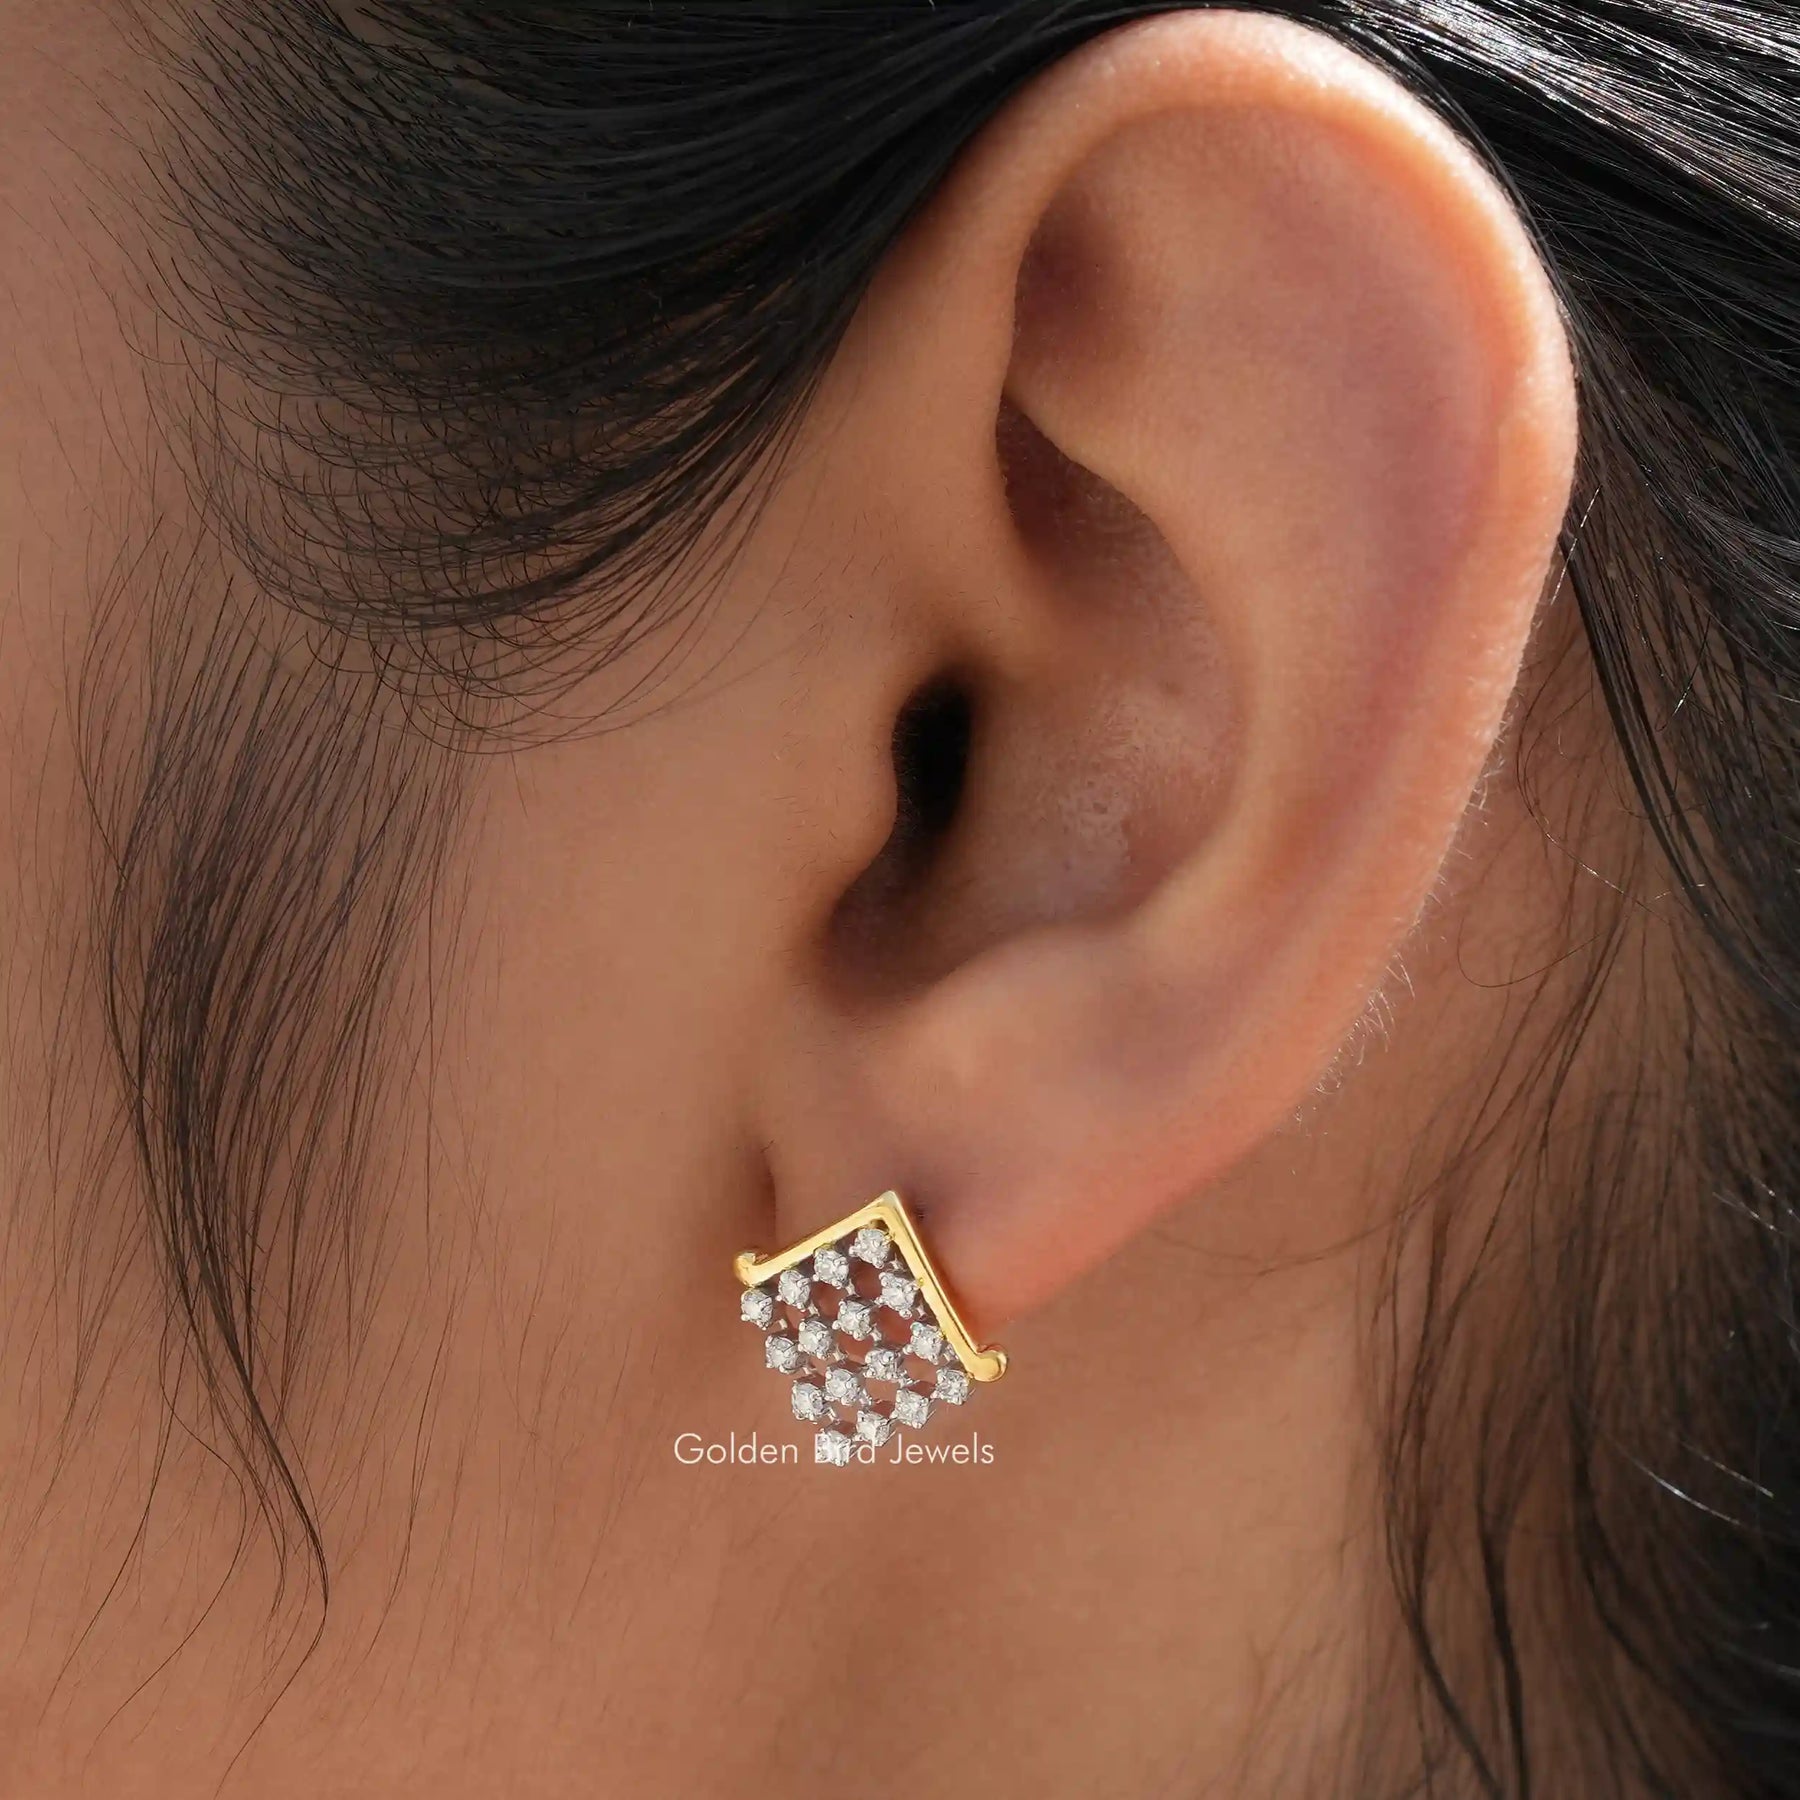 [This moissanite earrings set in round cut stones]-[Golden Bird Jewels]